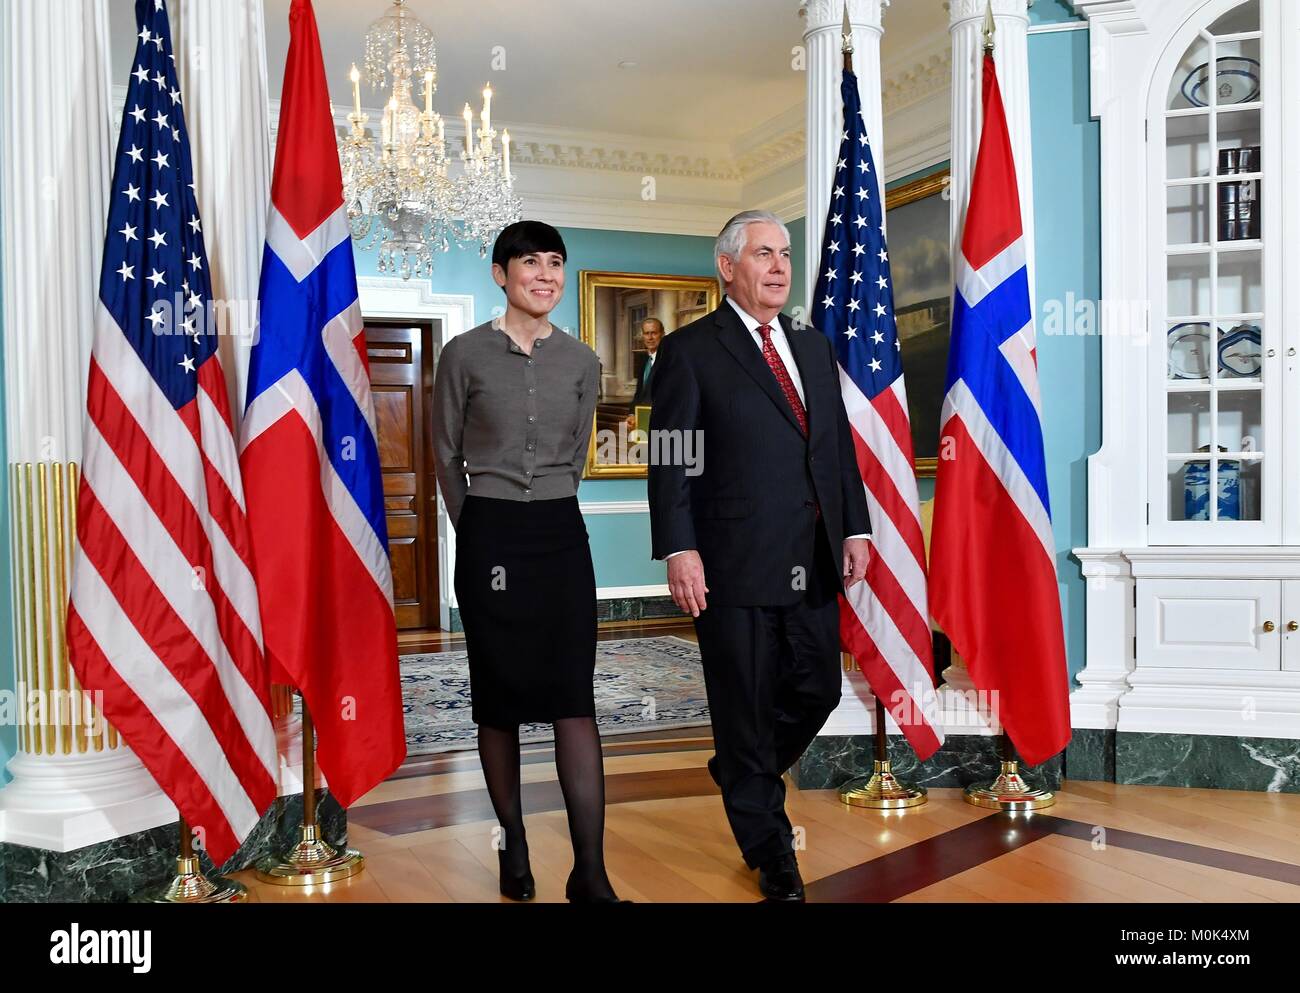 Norwegian Foreign Minister Ine Marie Eriksen Soreide (left) meets with U.S. Secretary of State Rex Tillerson at the U.S. Department of State January 11, 2018 in Washington, DC. Stock Photo